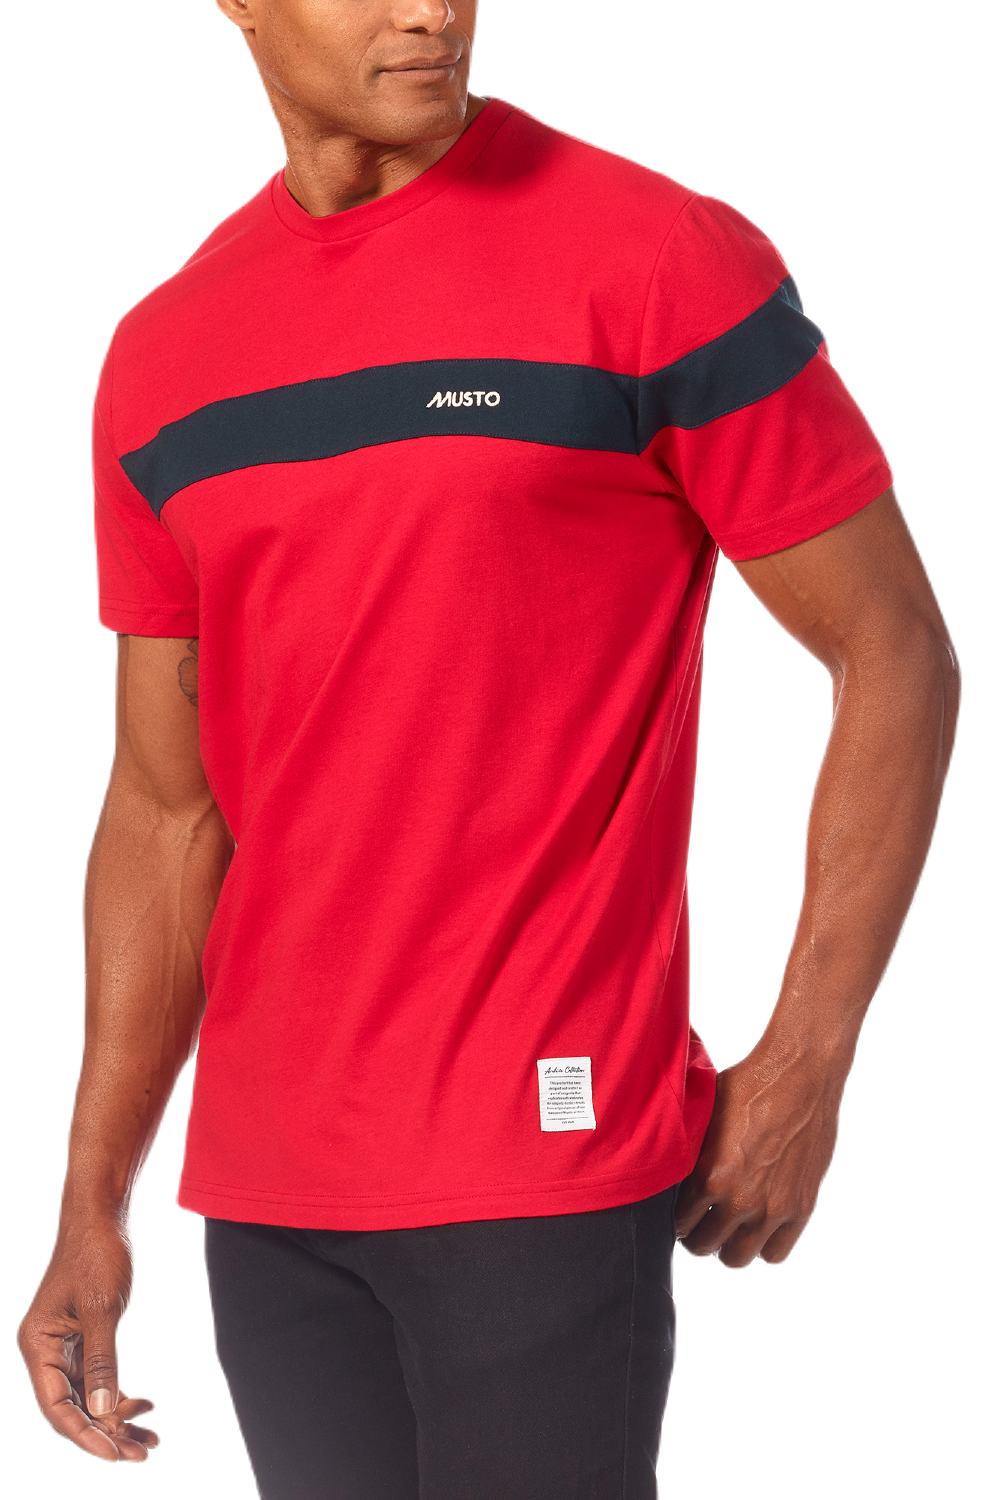 Musto 64 T-Shirt Red